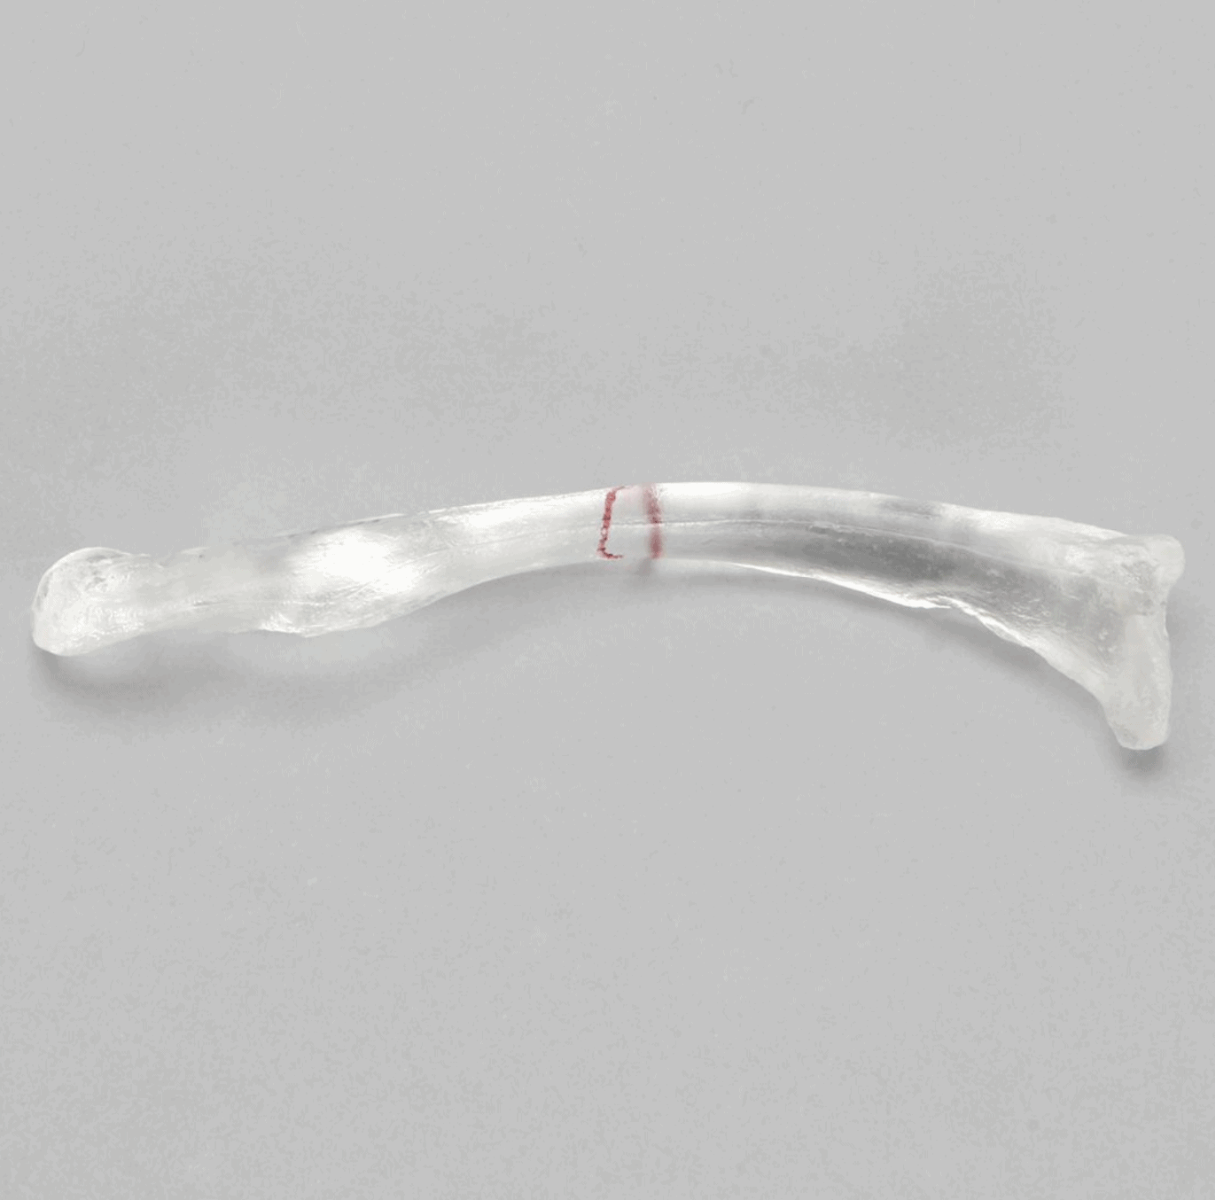 Clavicle with Scribed Fracture Line, Solid Clear Plastic 